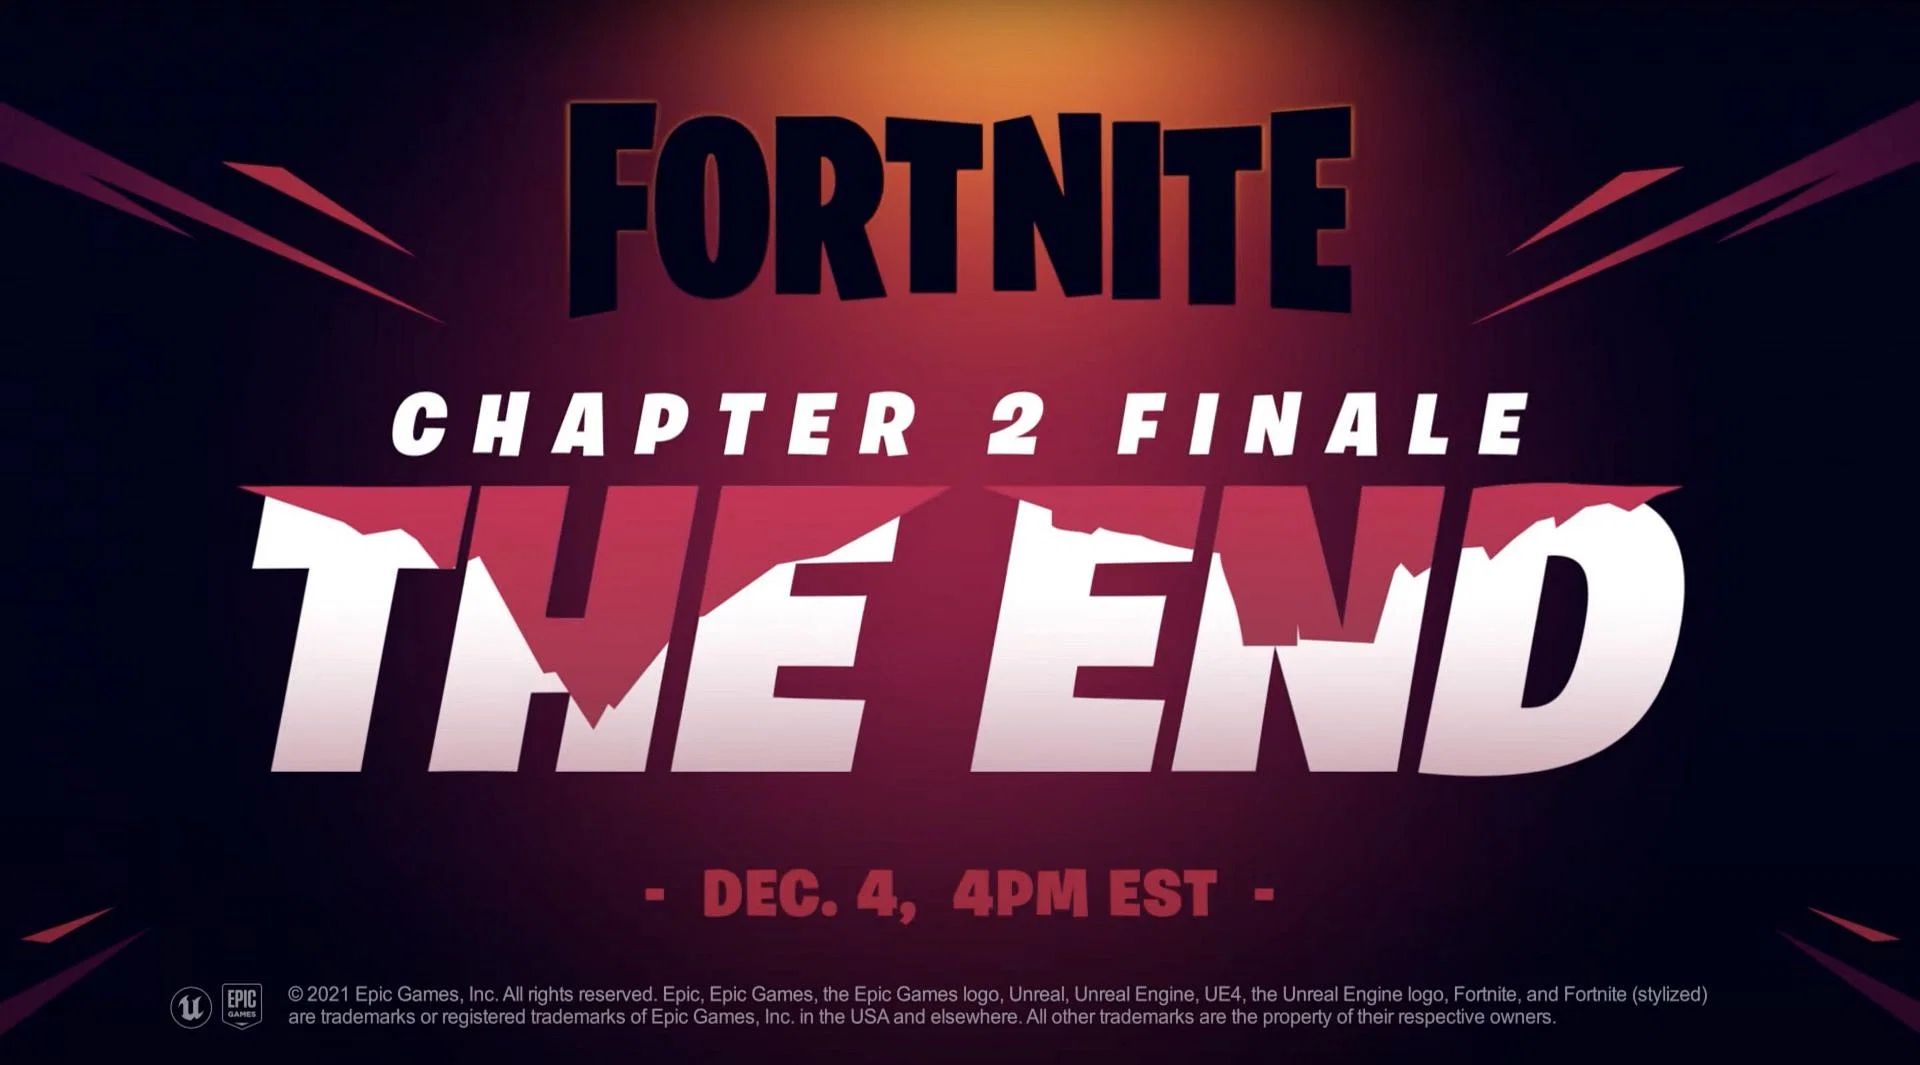 Fortnite Chapter 2 to Conclude With The End Event Next Week